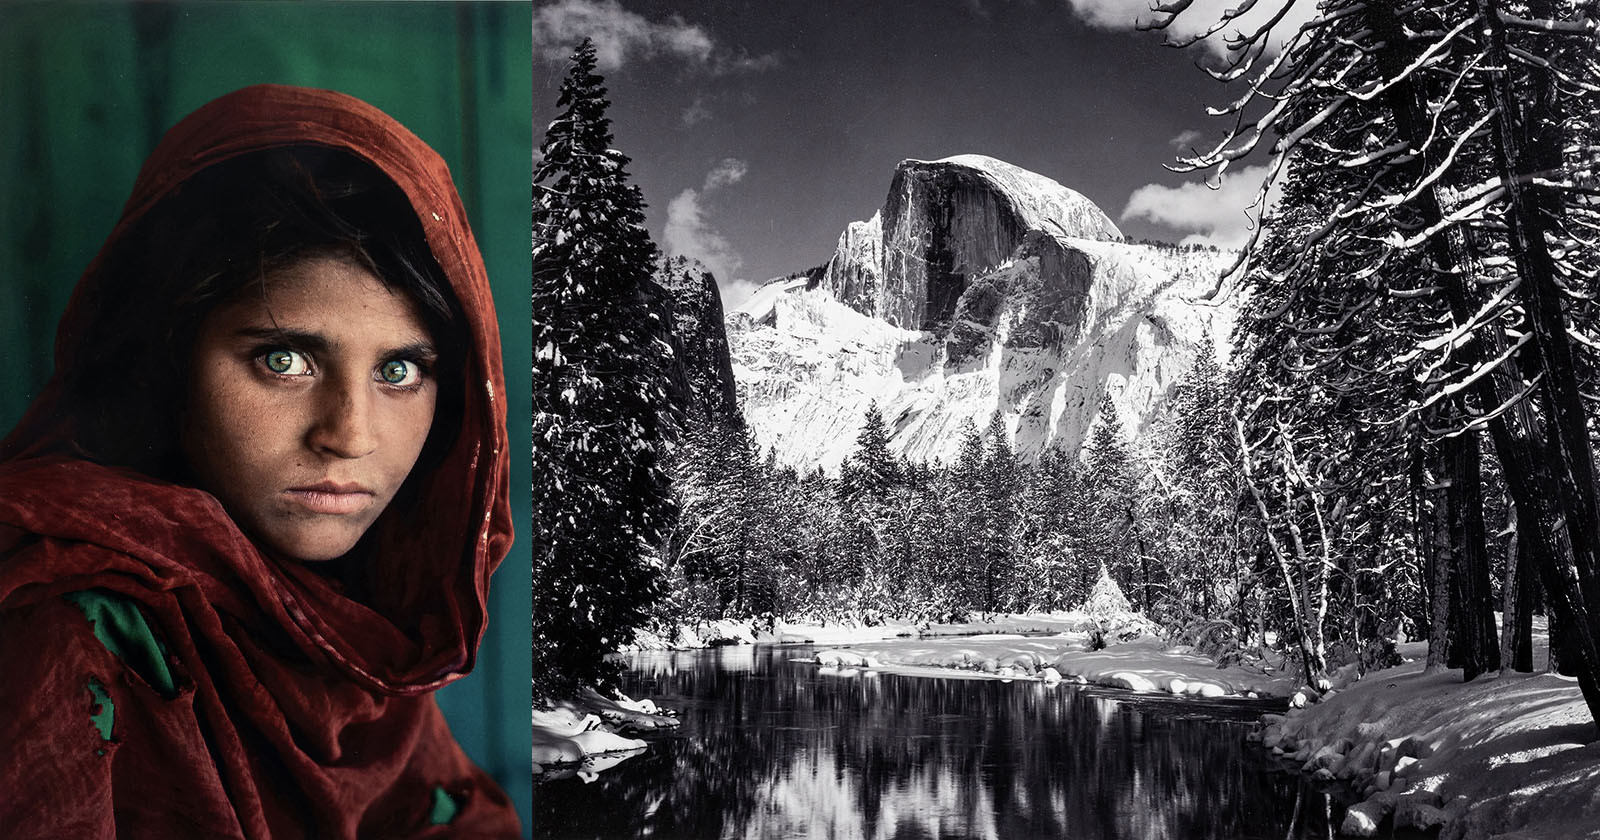 Photo Auction Features the Works of Ansel Adams, Steve McCurry, and More